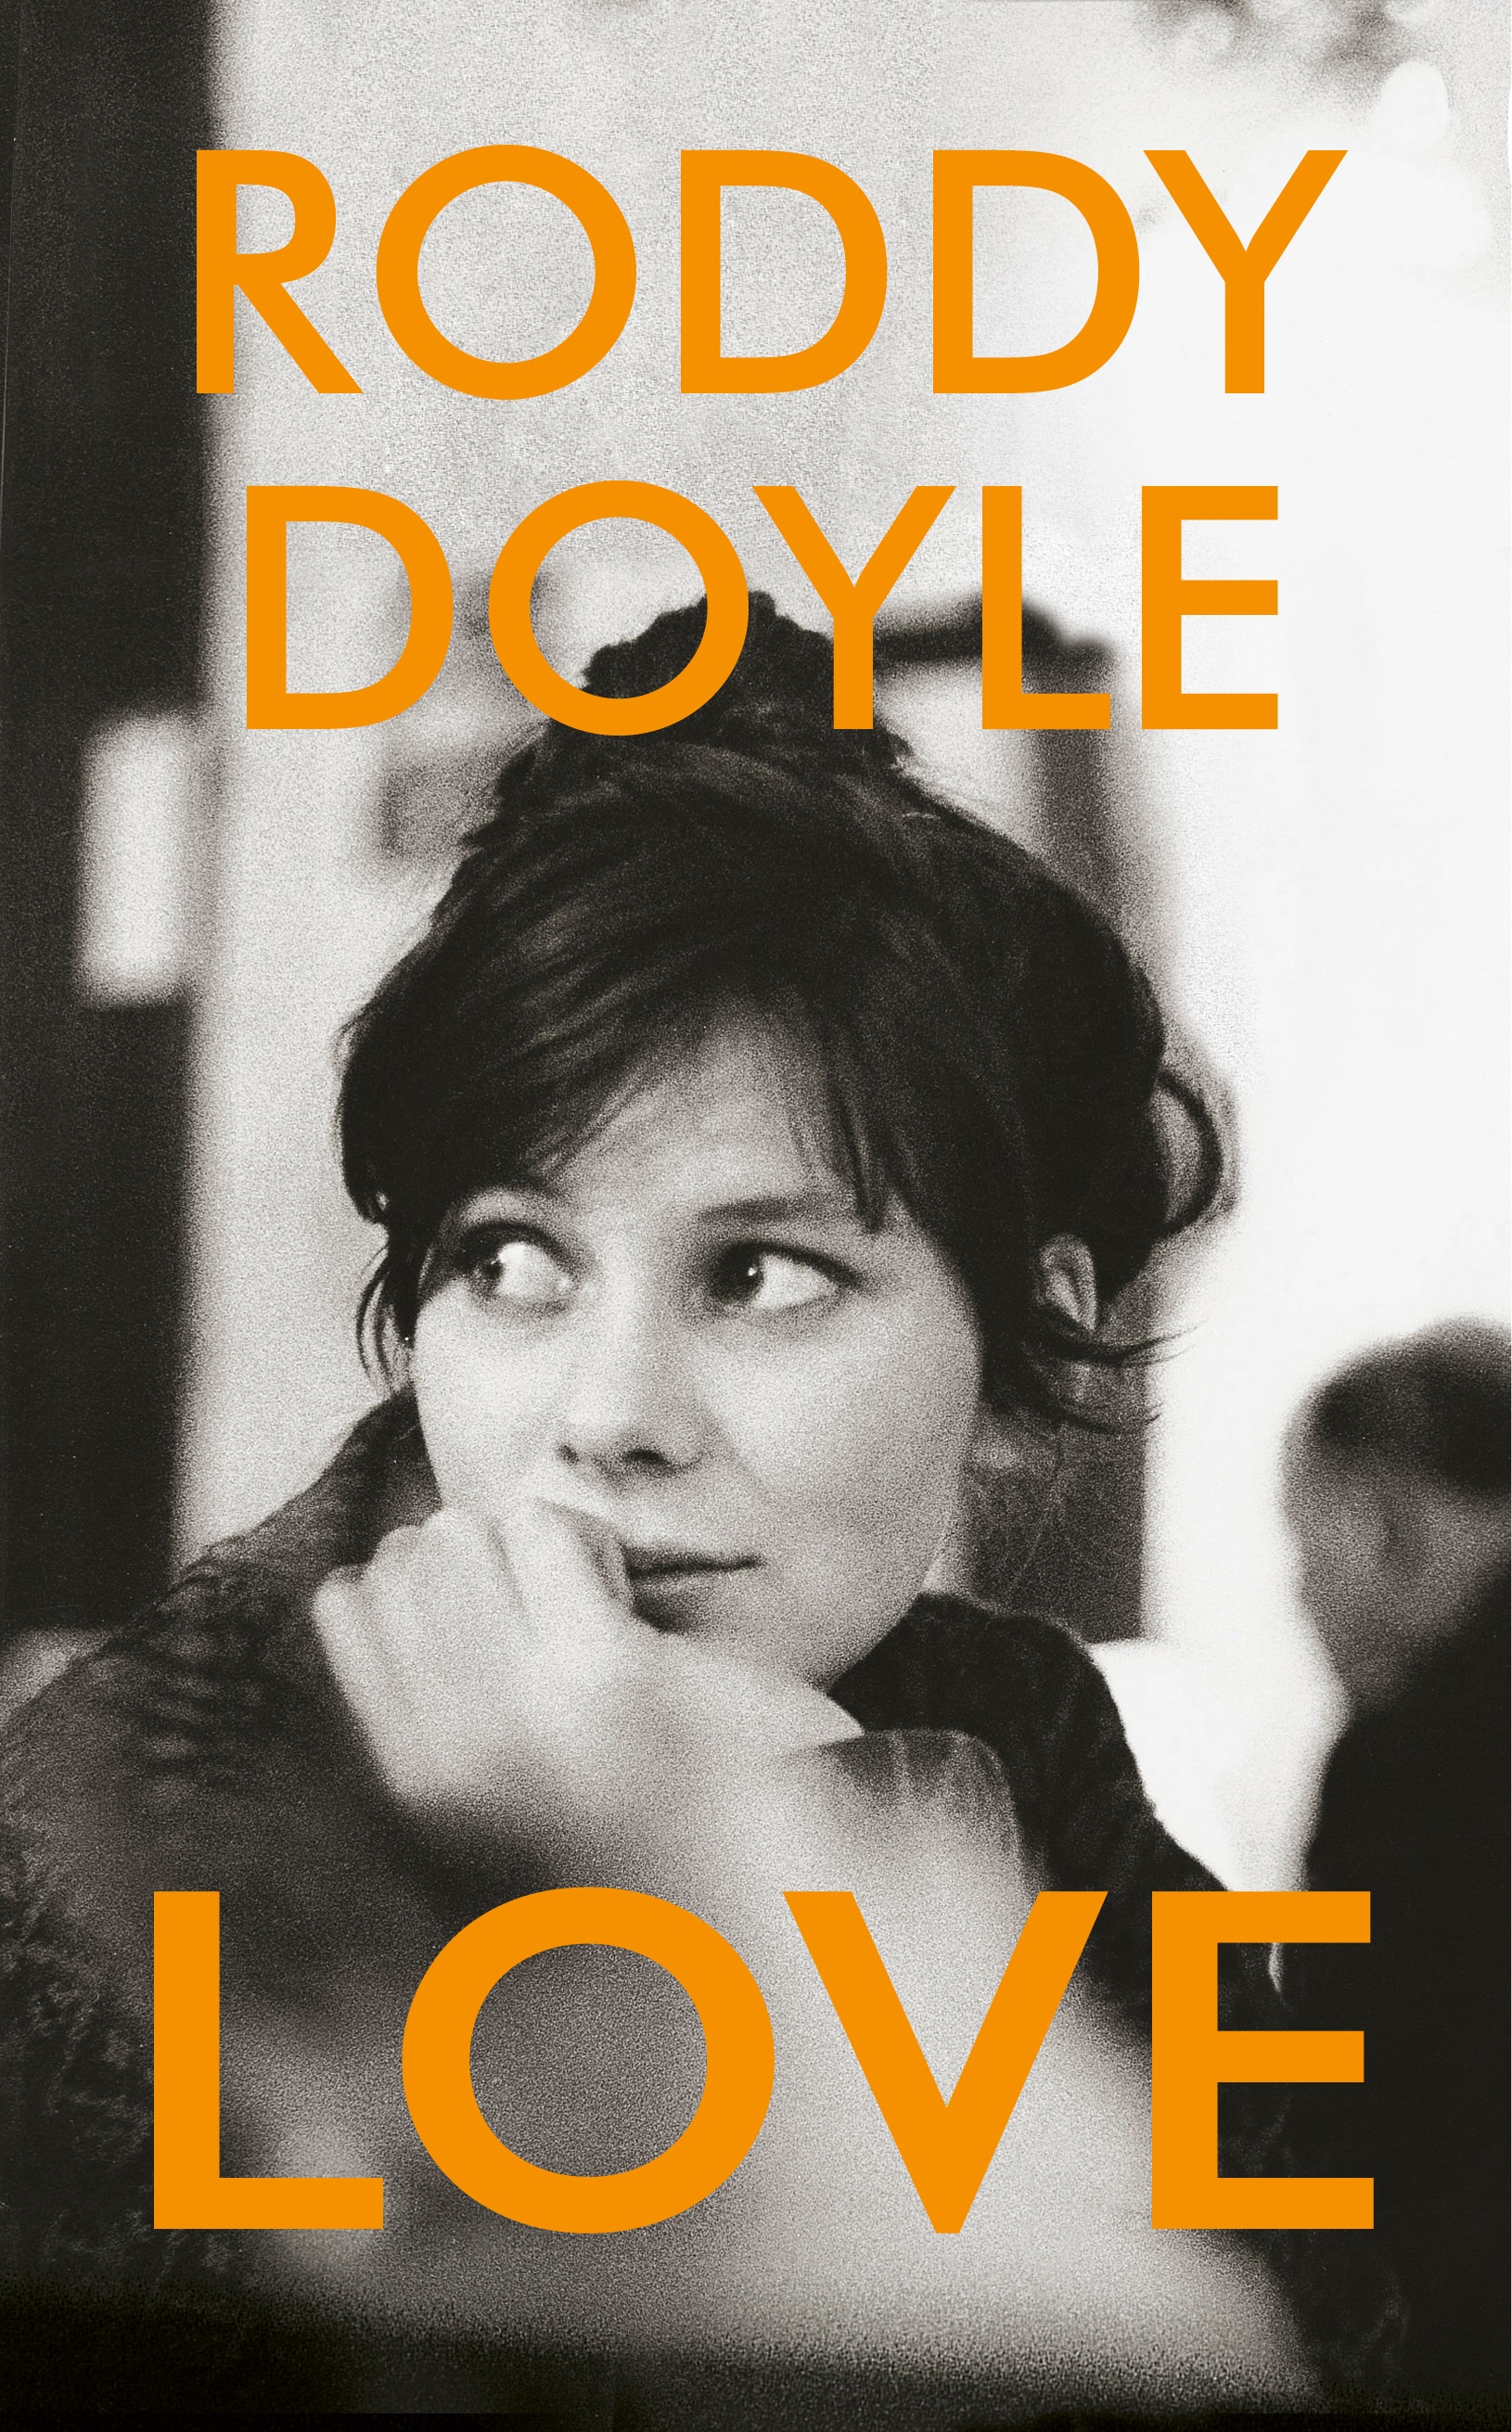 Book “Love” by Roddy Doyle — October 15, 2020